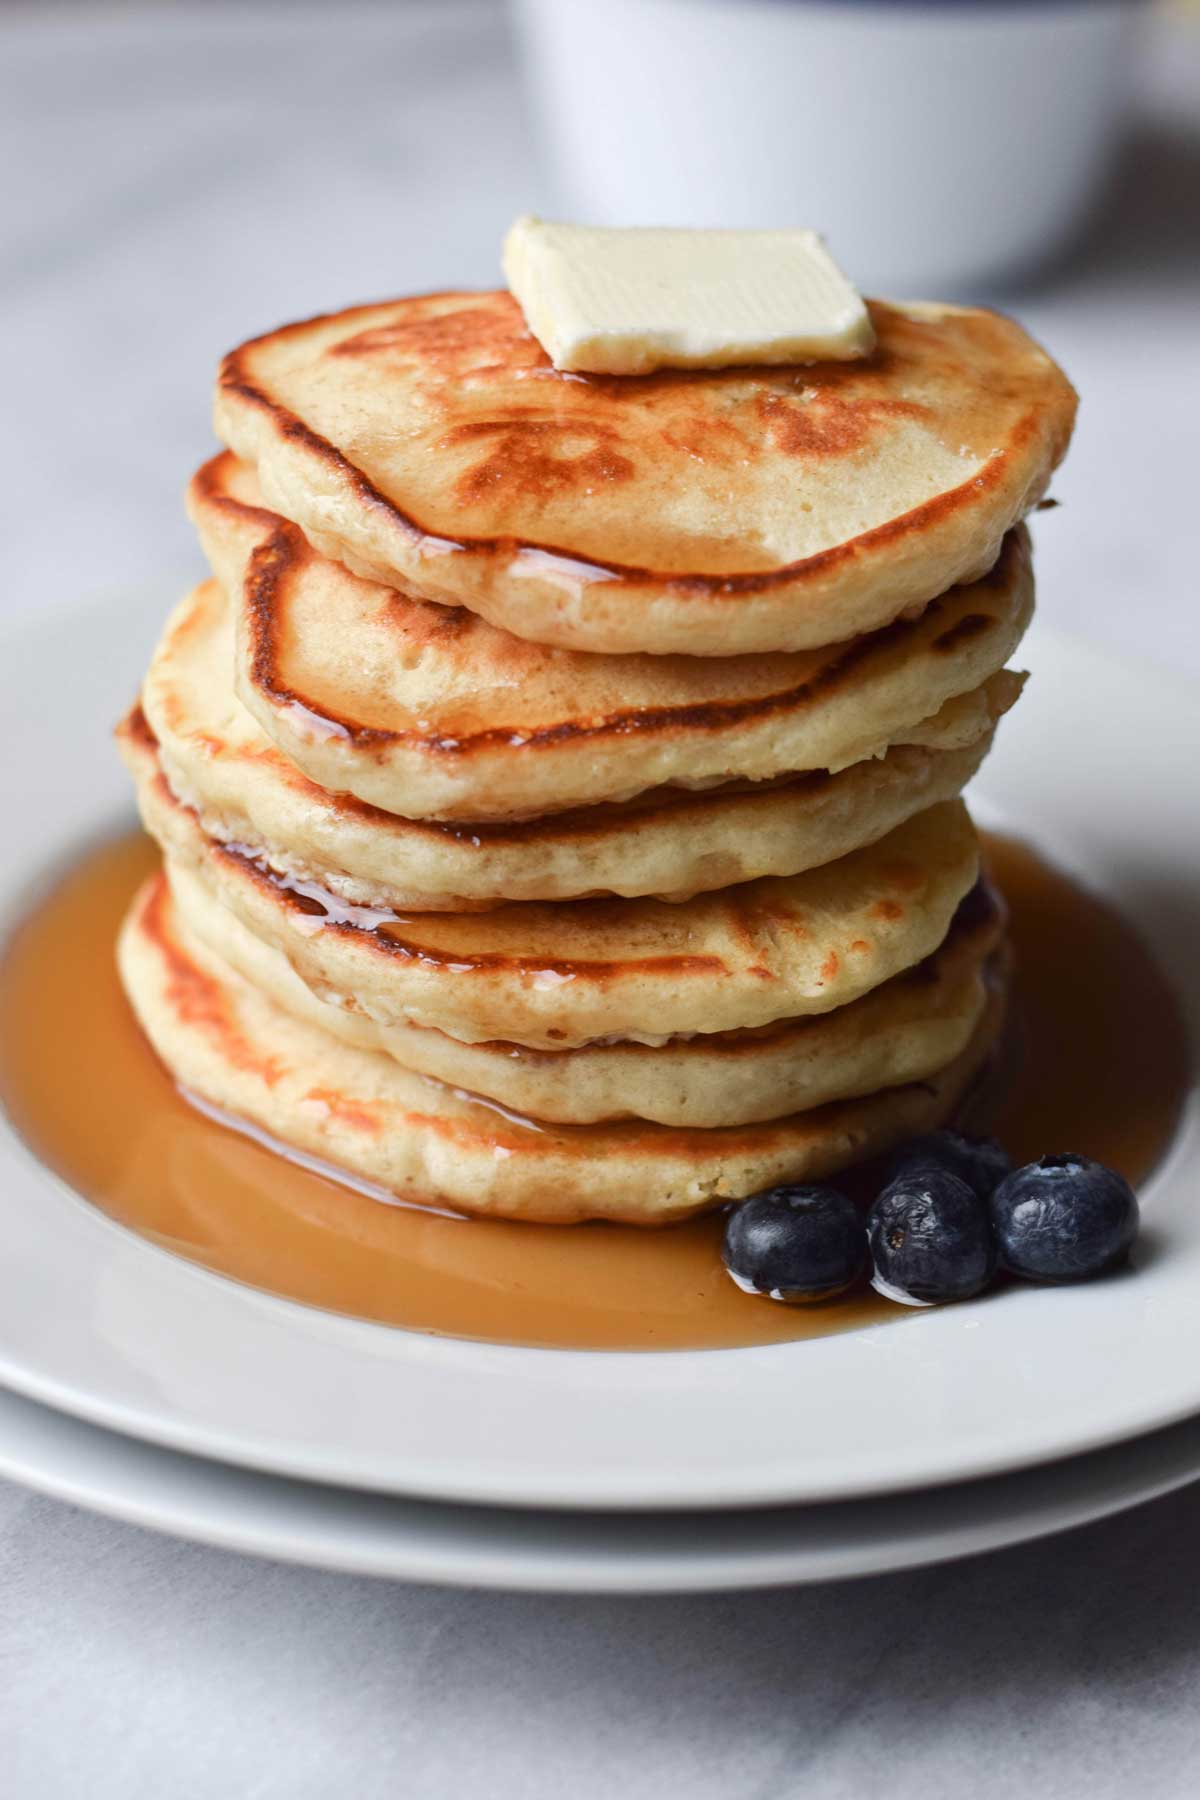 Old Fashioned Pancakes with Syrup, Butter, and Blueberries